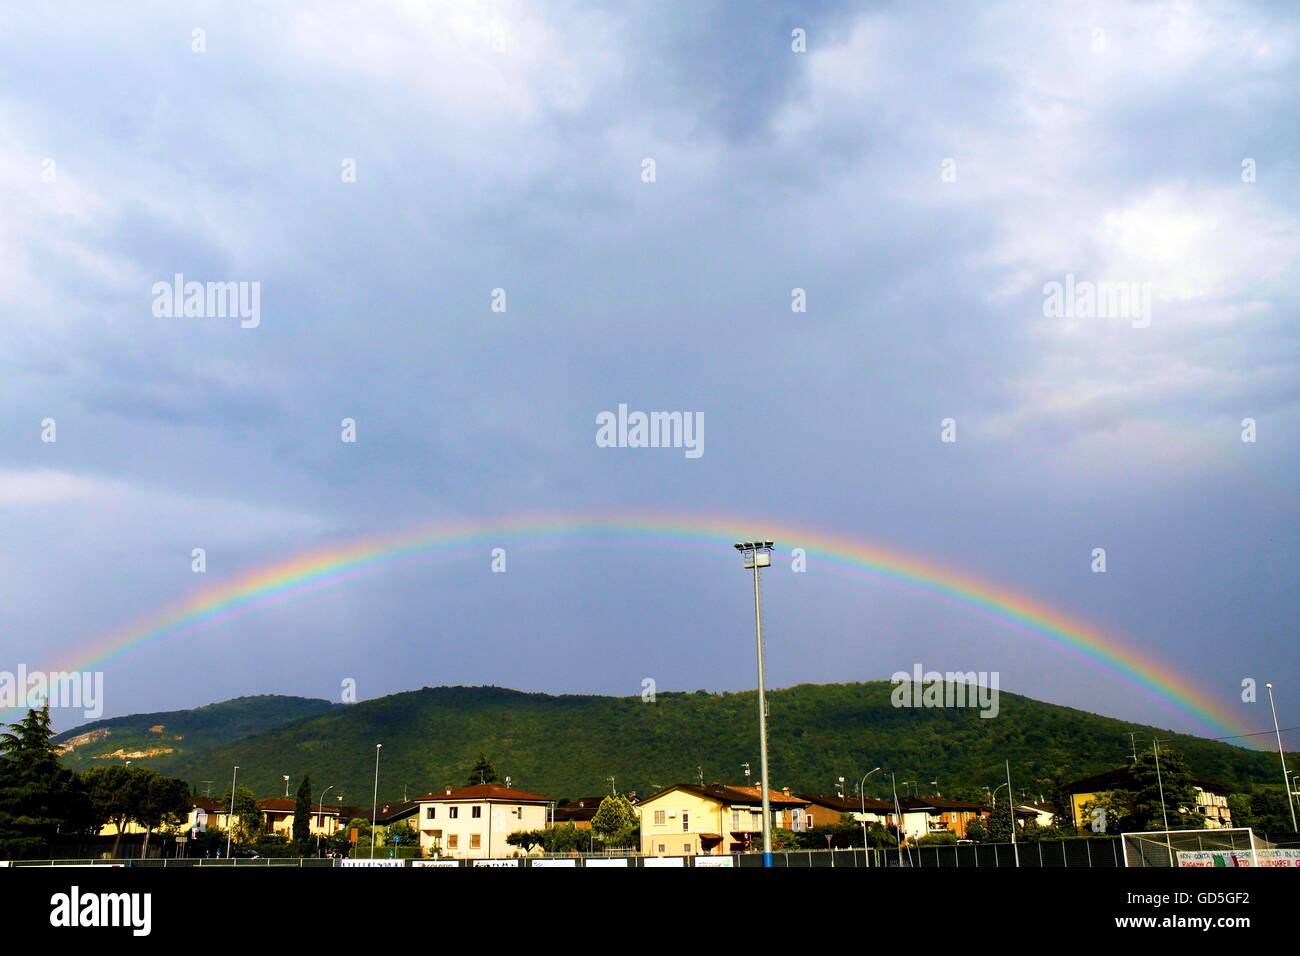 Sky with rainbow and mountains background Stock Photo